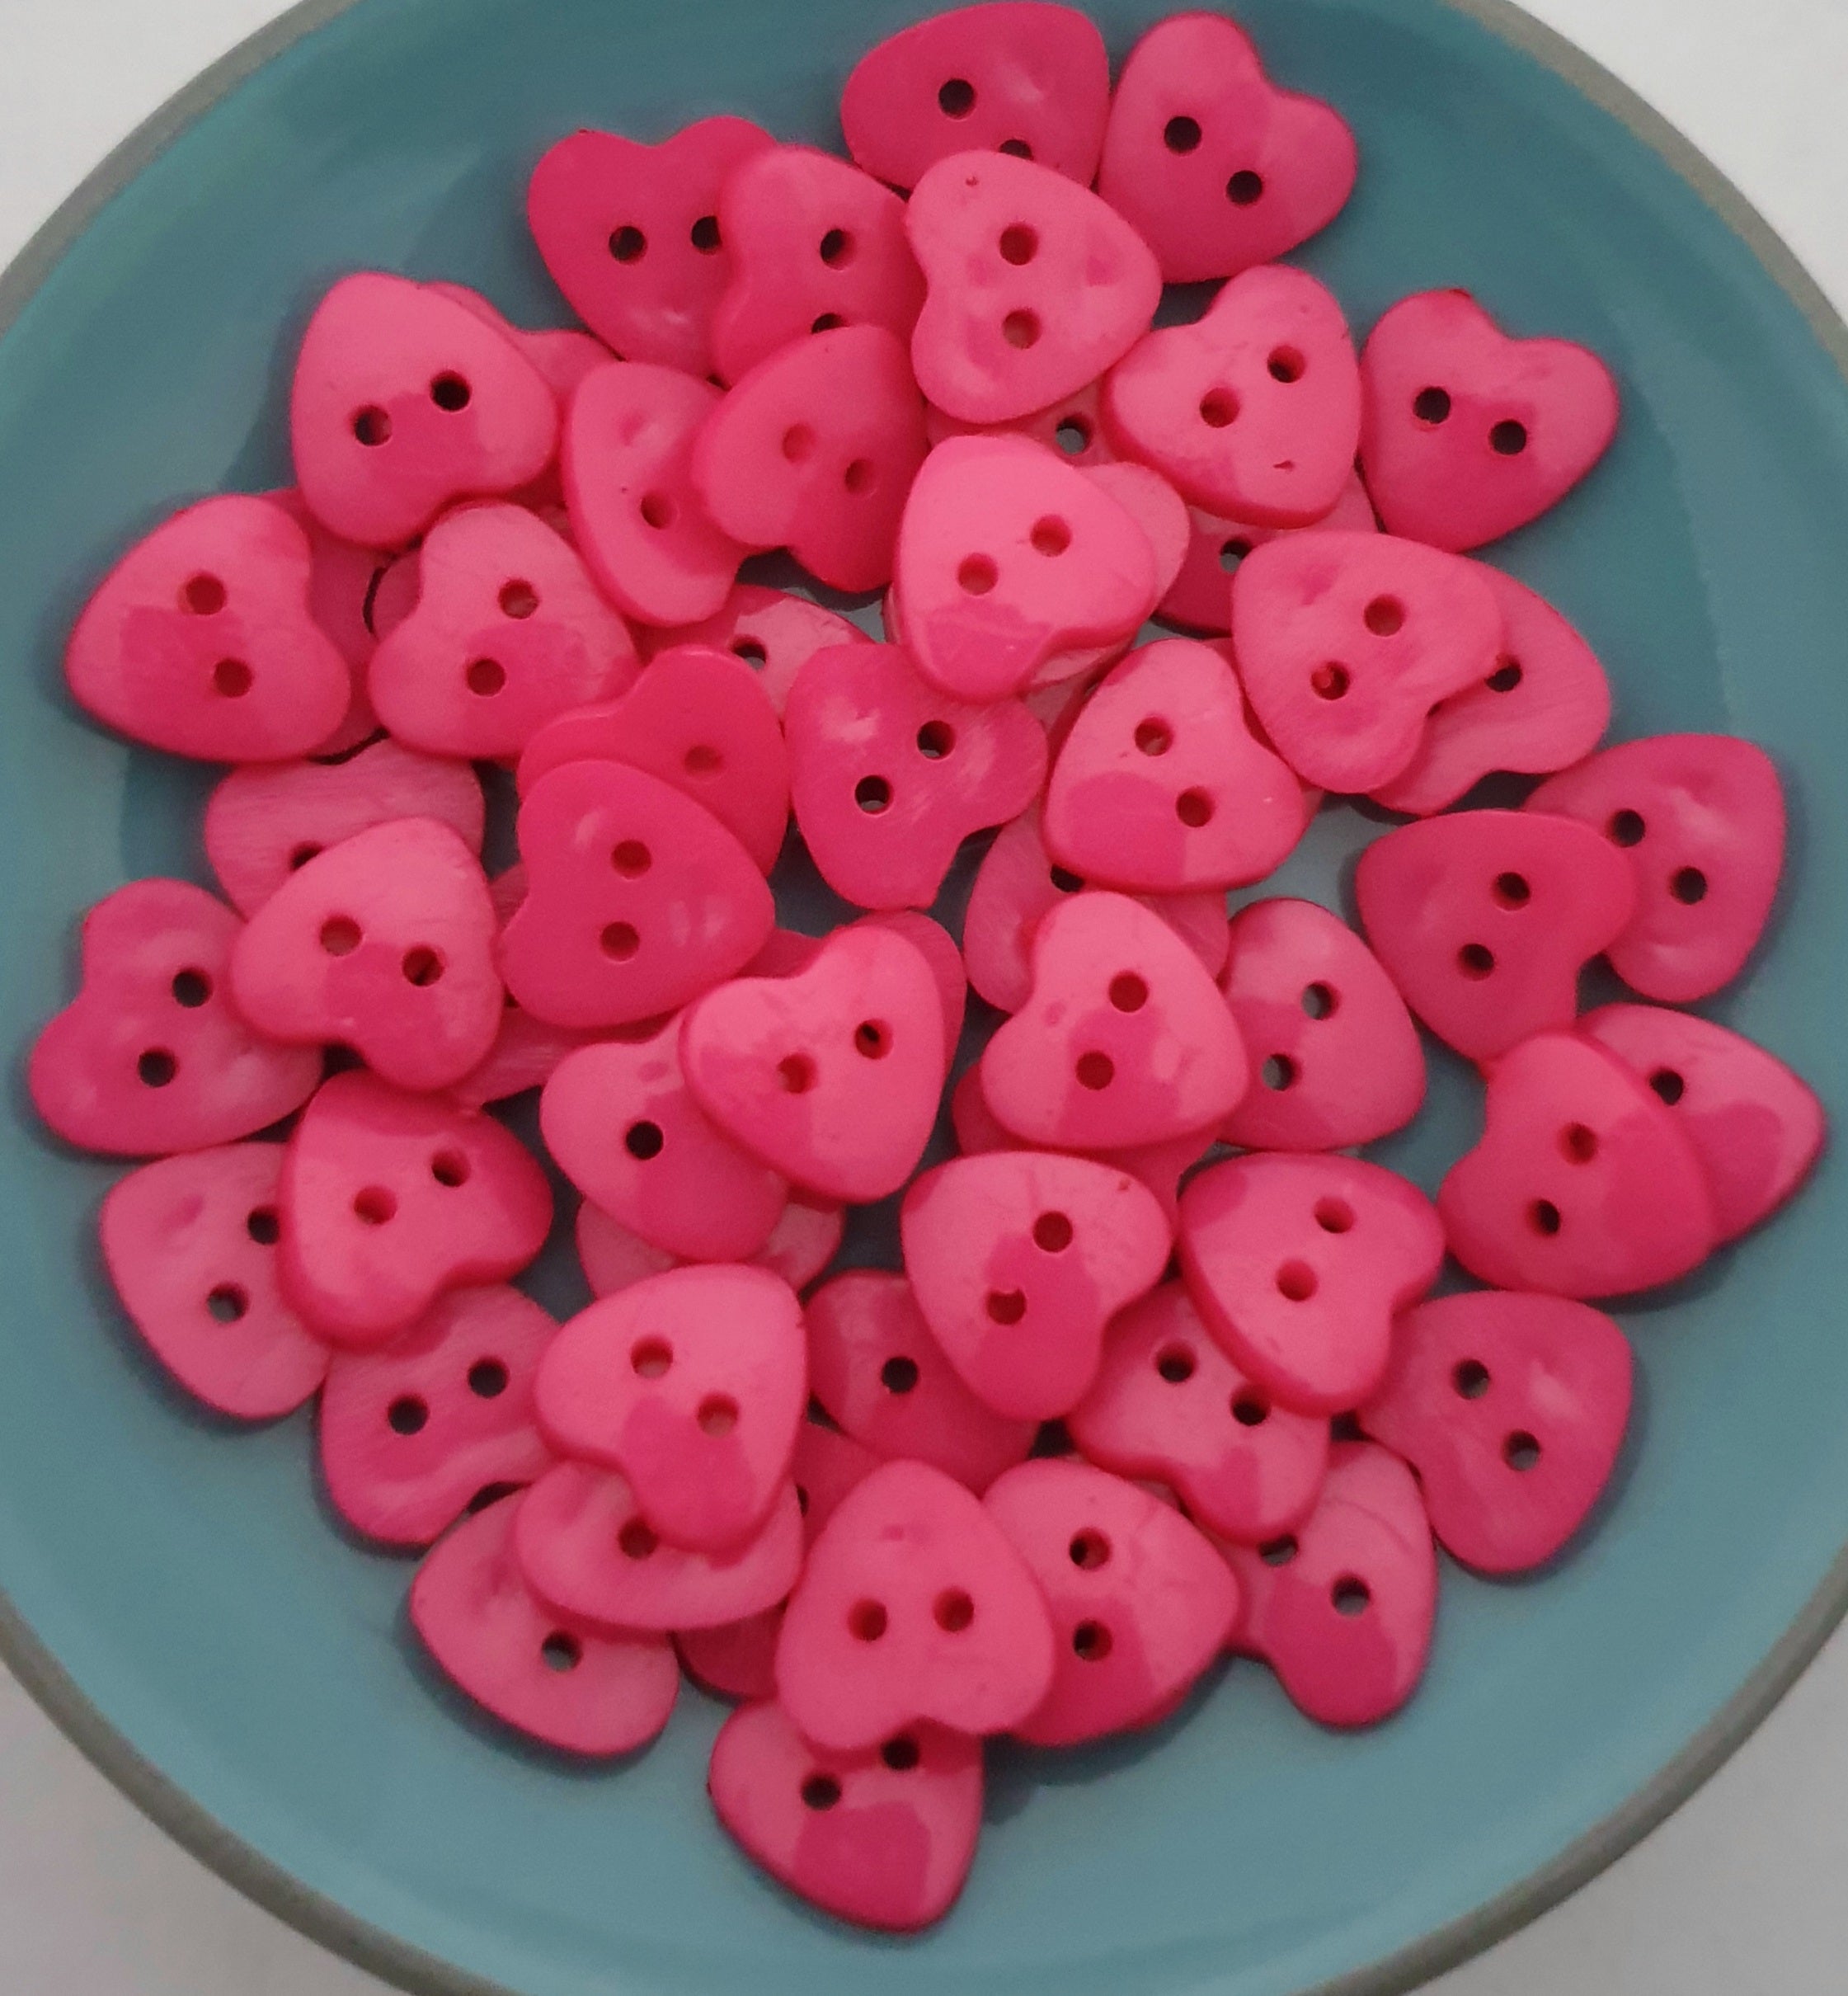 MajorCrafts 60pcs 13mm Hot Pink Heart Shaped 2 Holes Resin Sewing Buttons